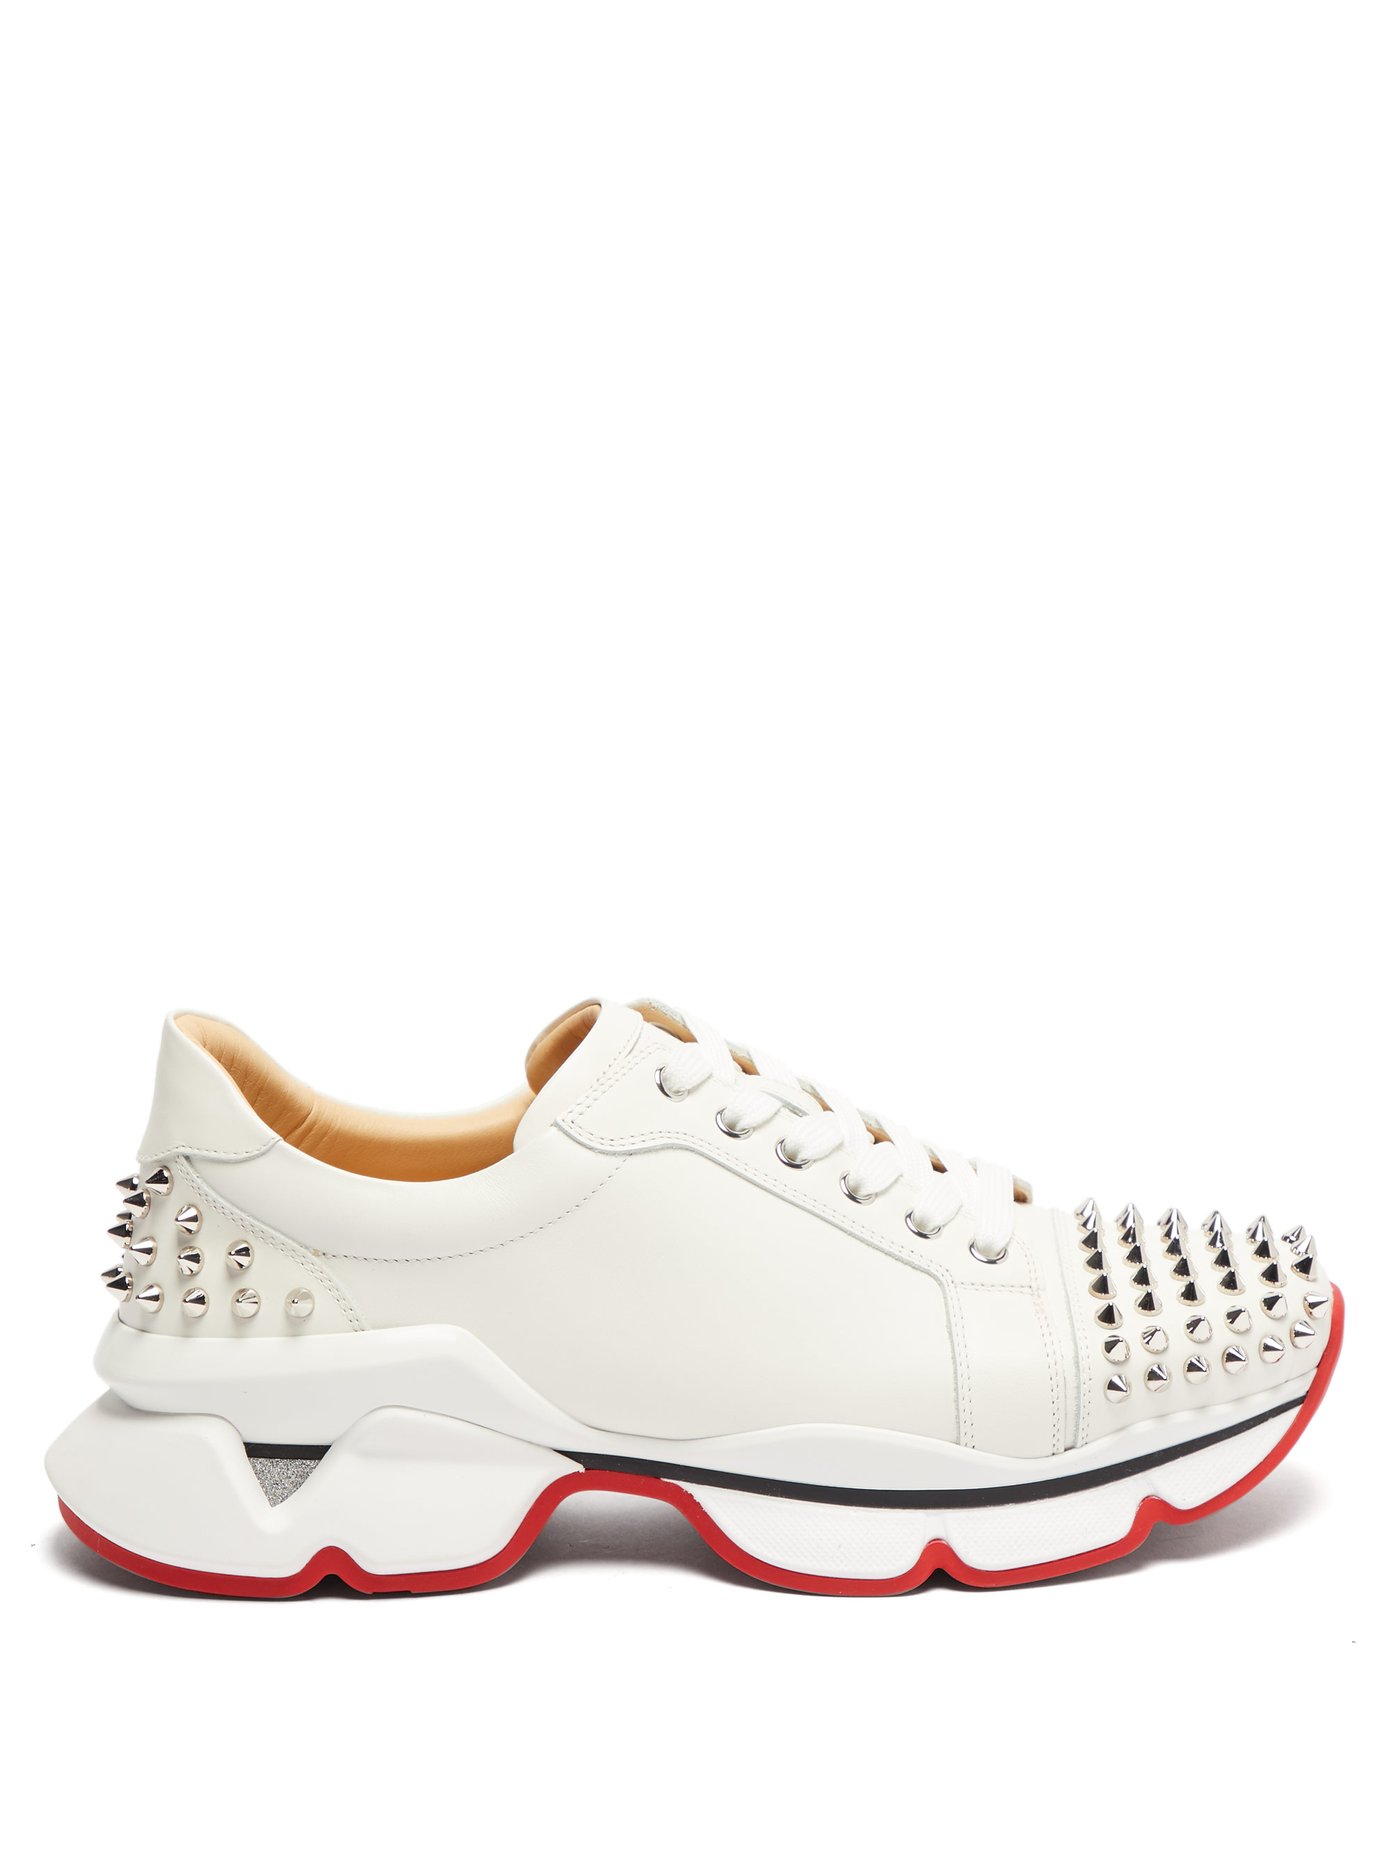 christian louboutin studded trainers